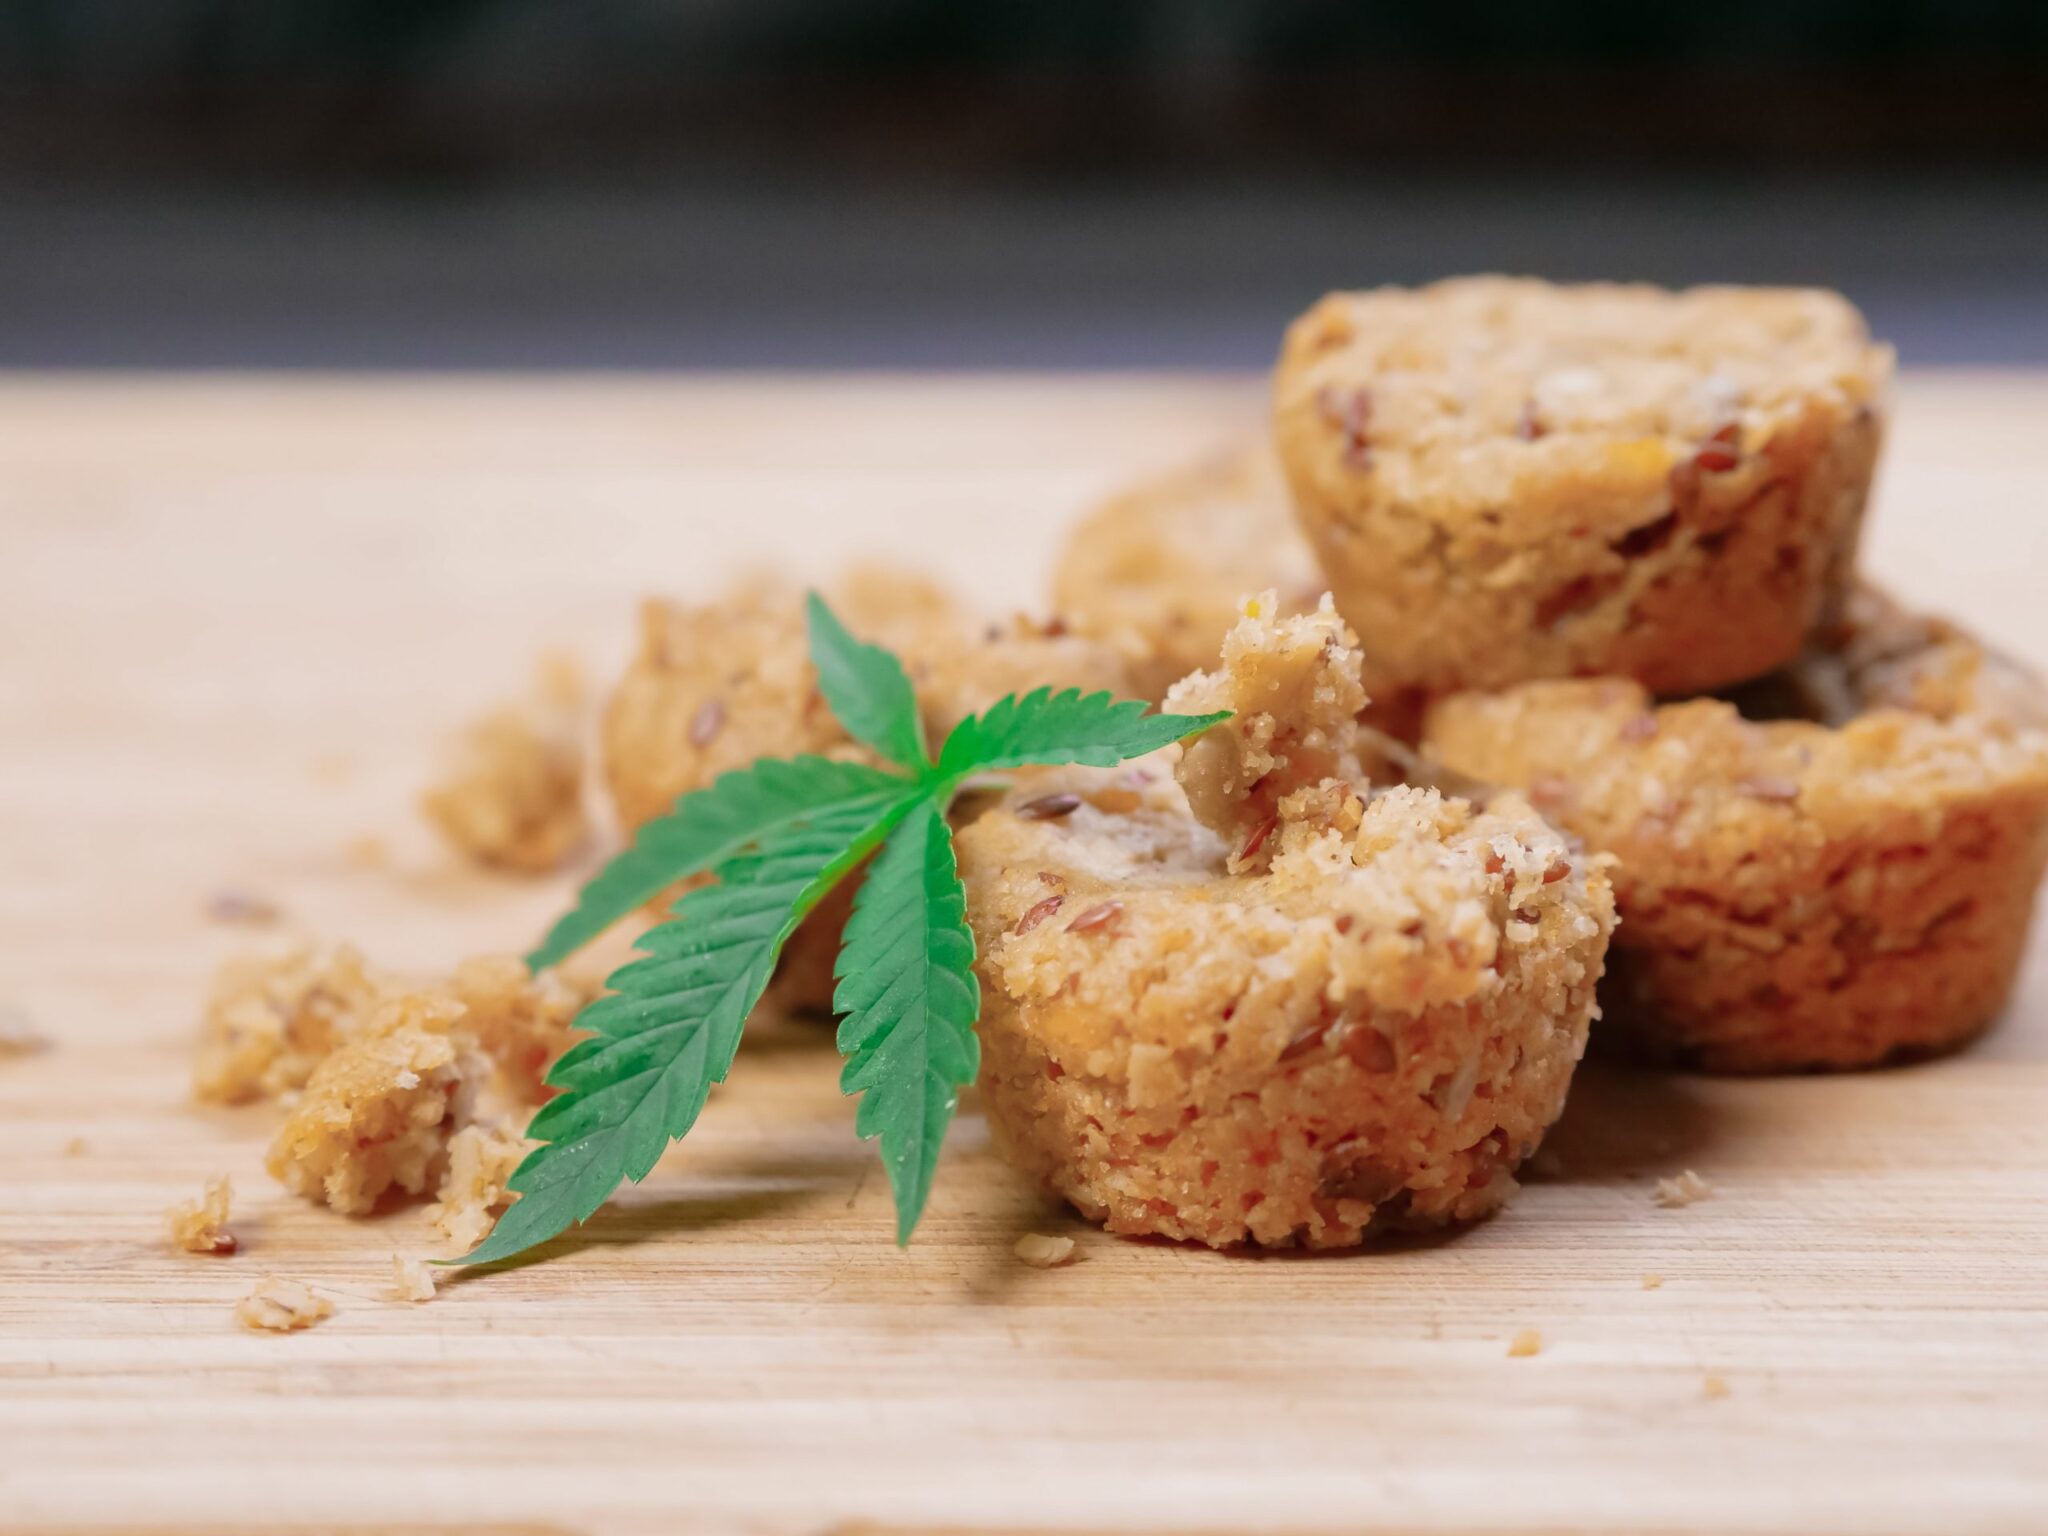 Photo of Cannibis Leaves Leaning on Muffins